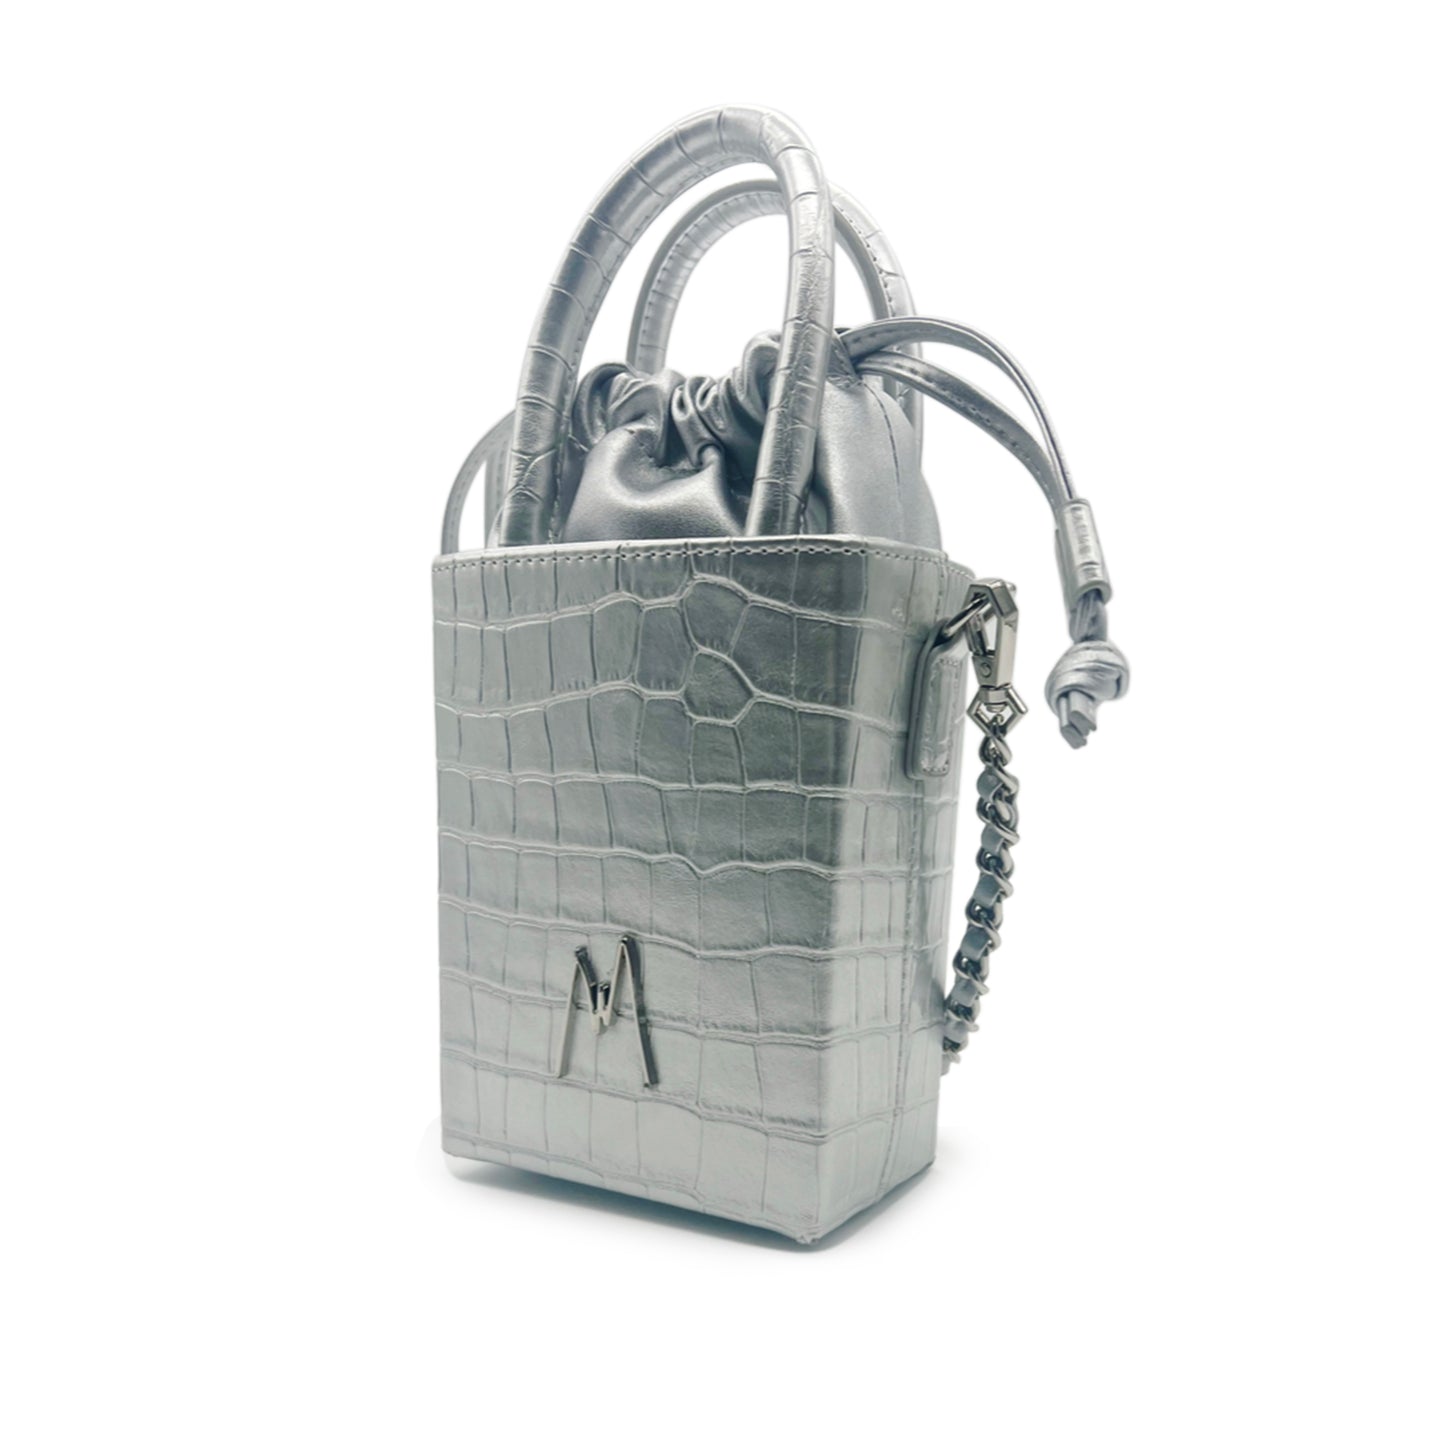 "SMALL LEATHER TOTE"  CROCODILE EMBOSSED - STERLING SILVER